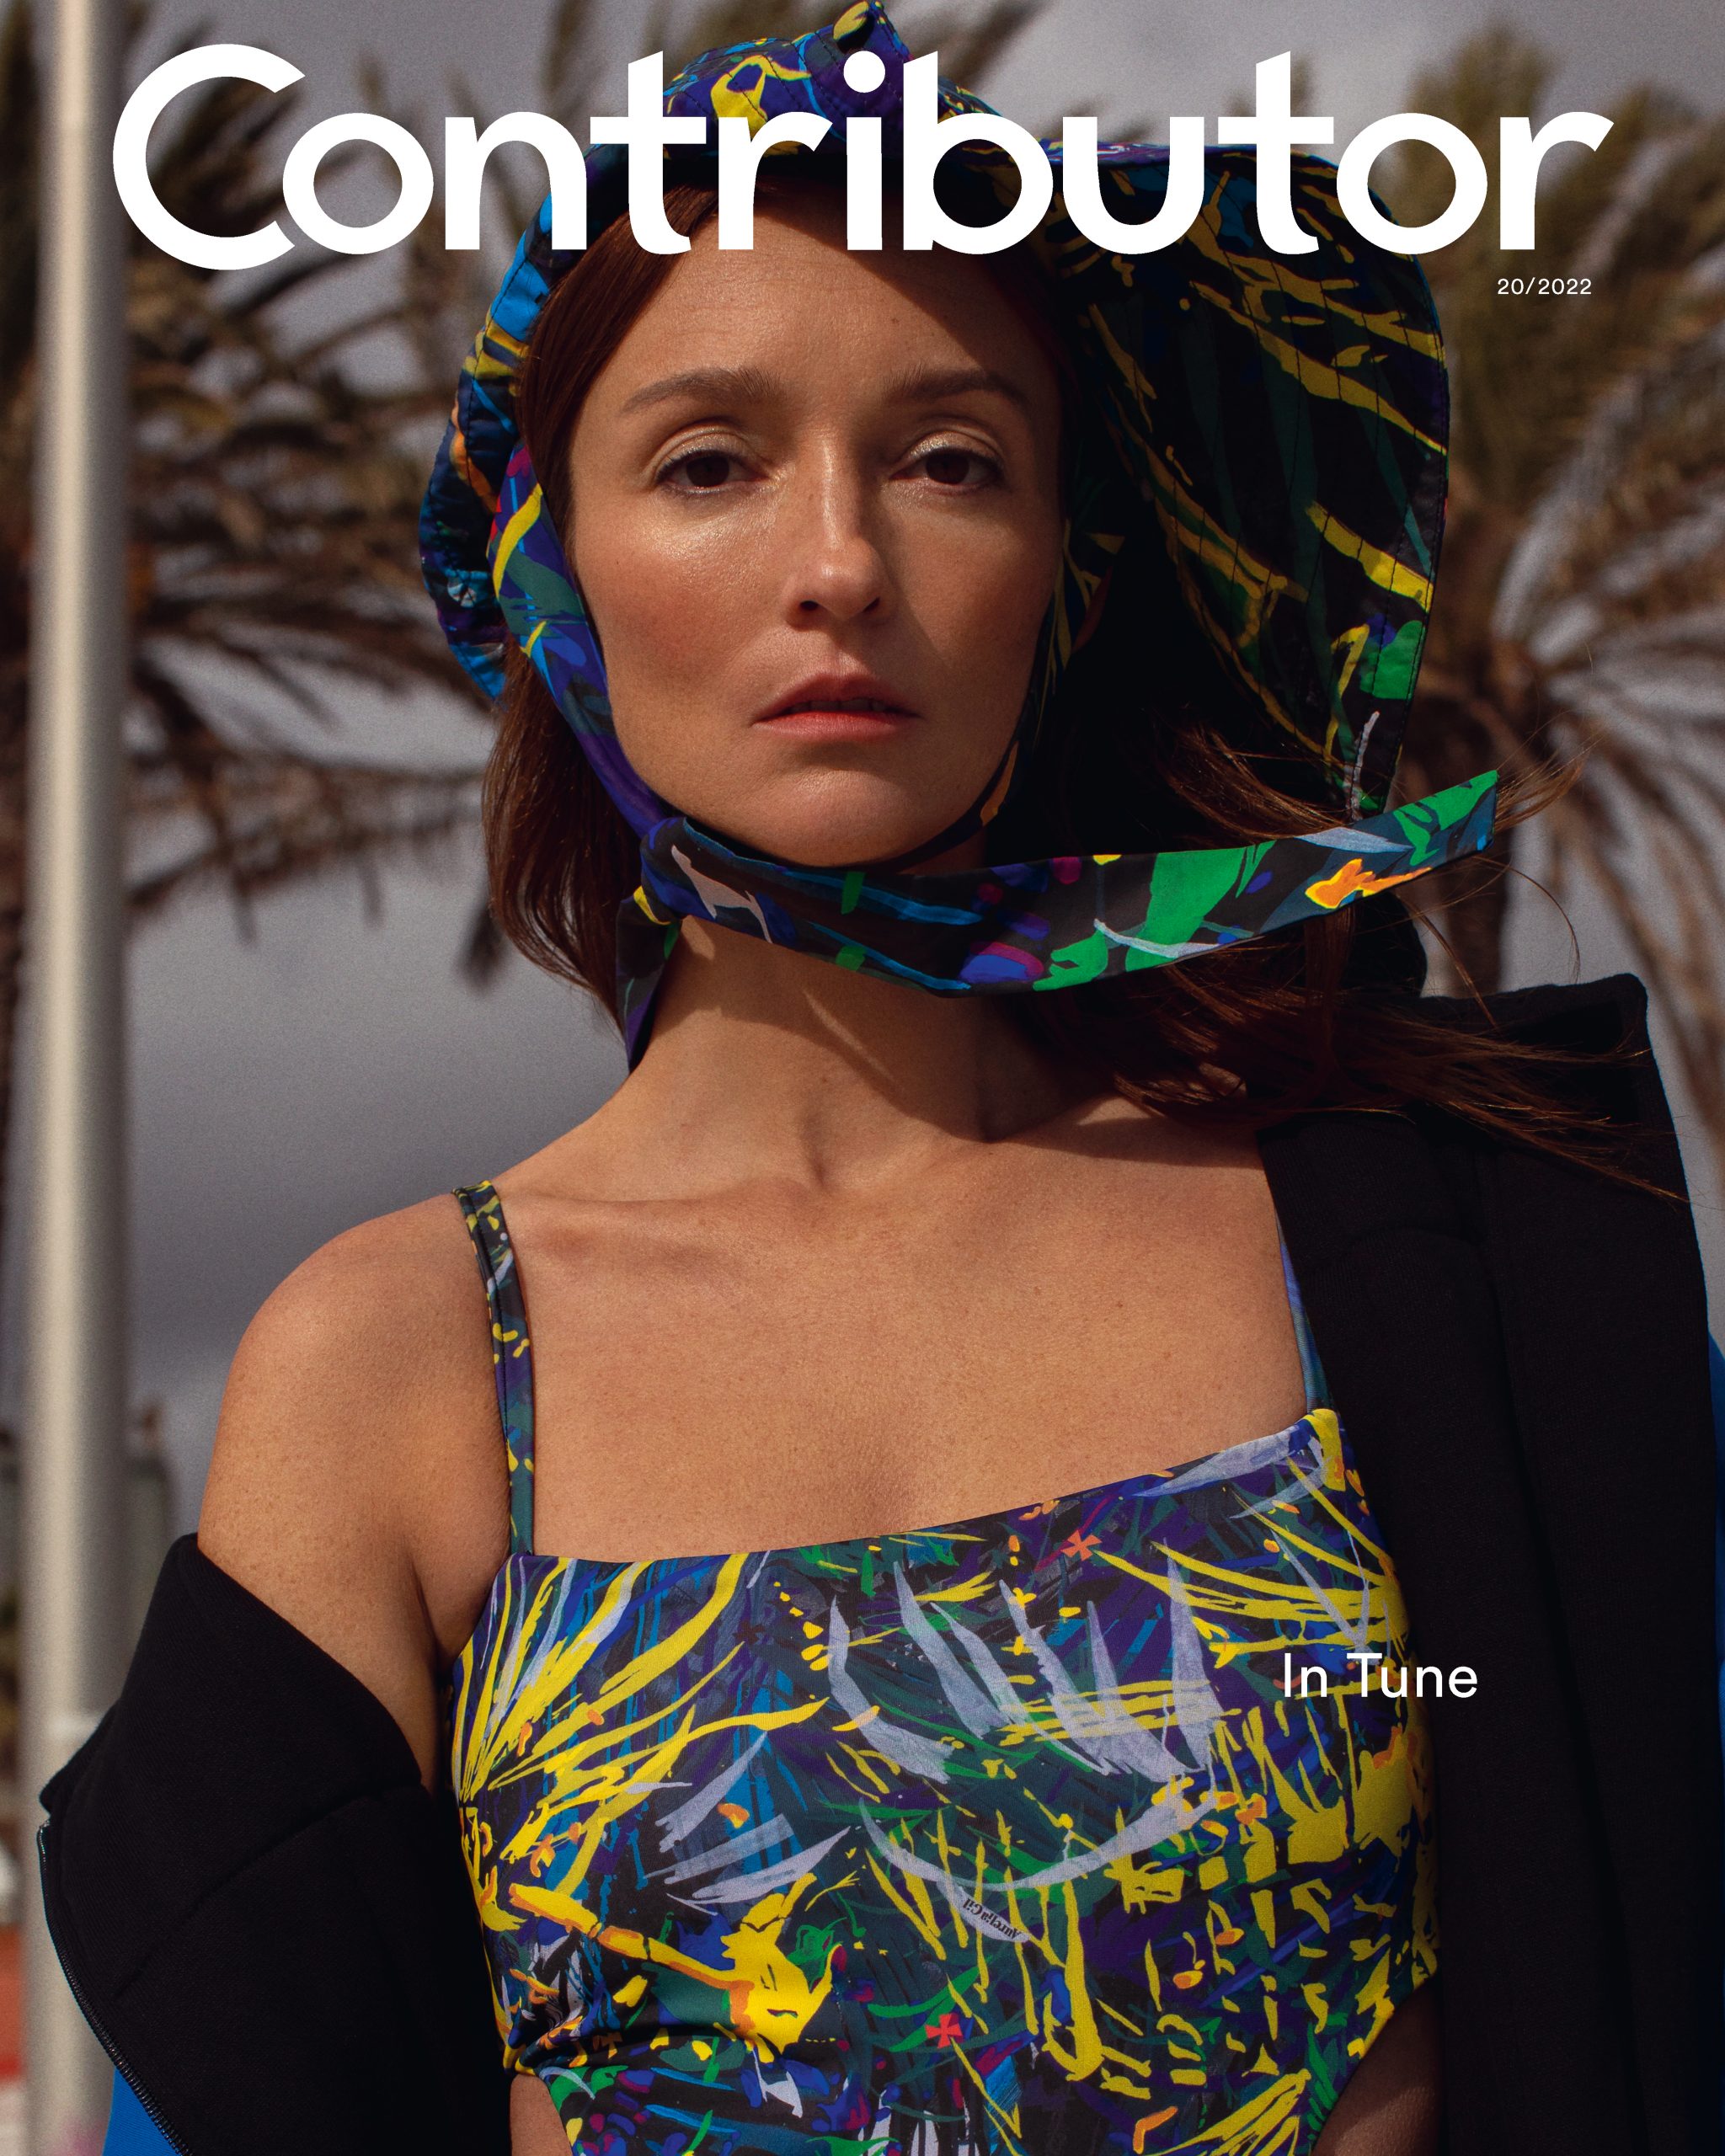 kathrin-hohberg-contributor-magazine-20-22-audrey-marnay-claudio-goncalves-magnus-magnusson-cover-01